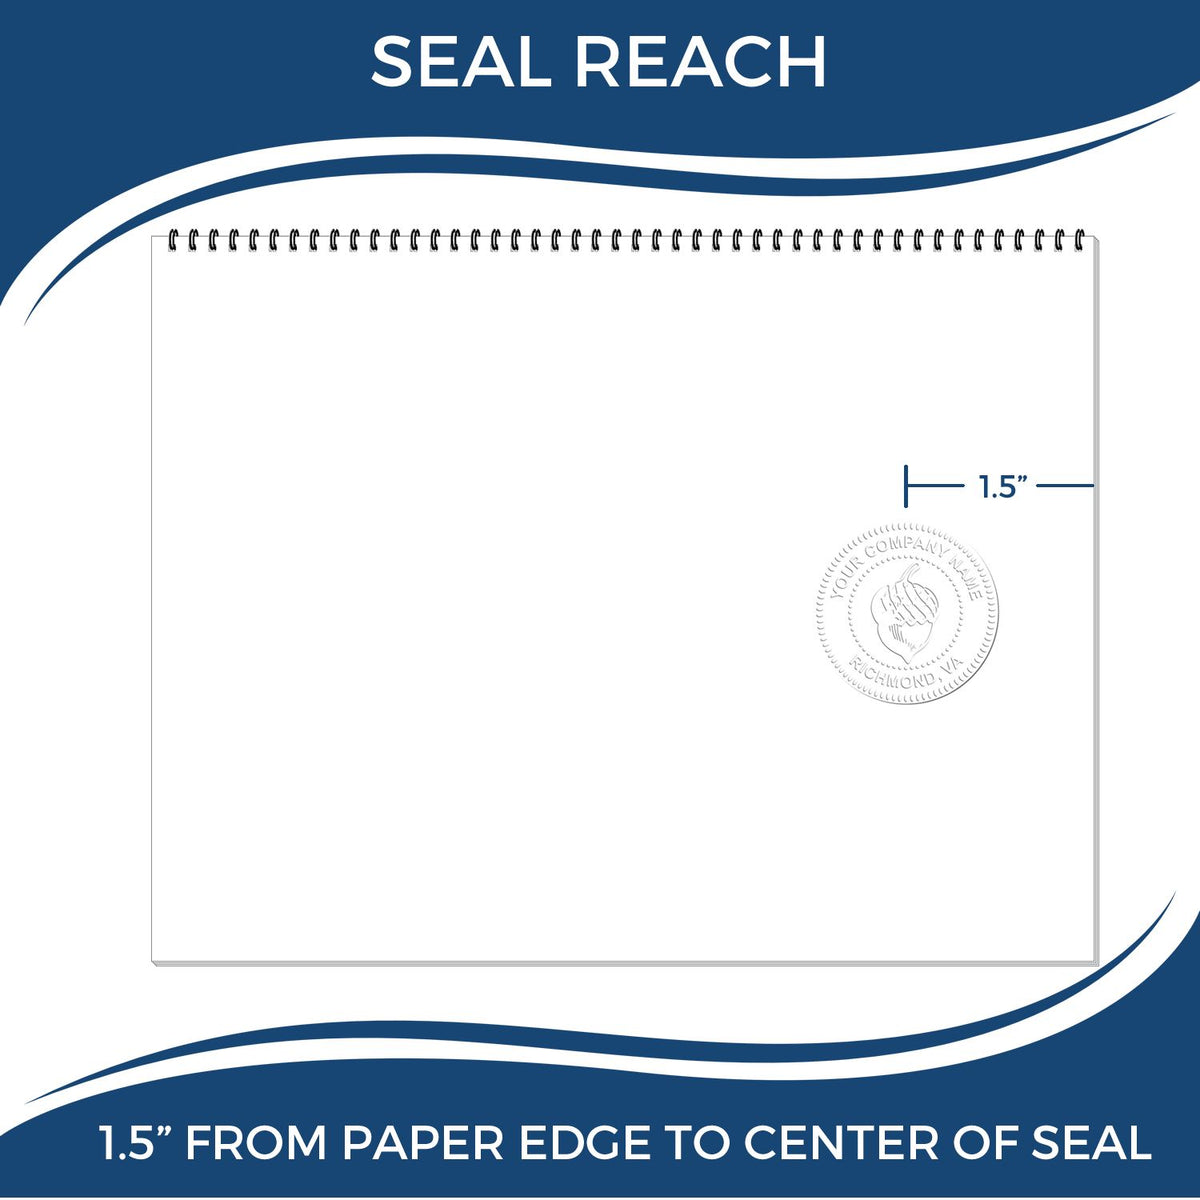 An infographic showing the seal reach which is represented by a ruler and a miniature seal image of the Handheld Alaska Land Surveyor Seal